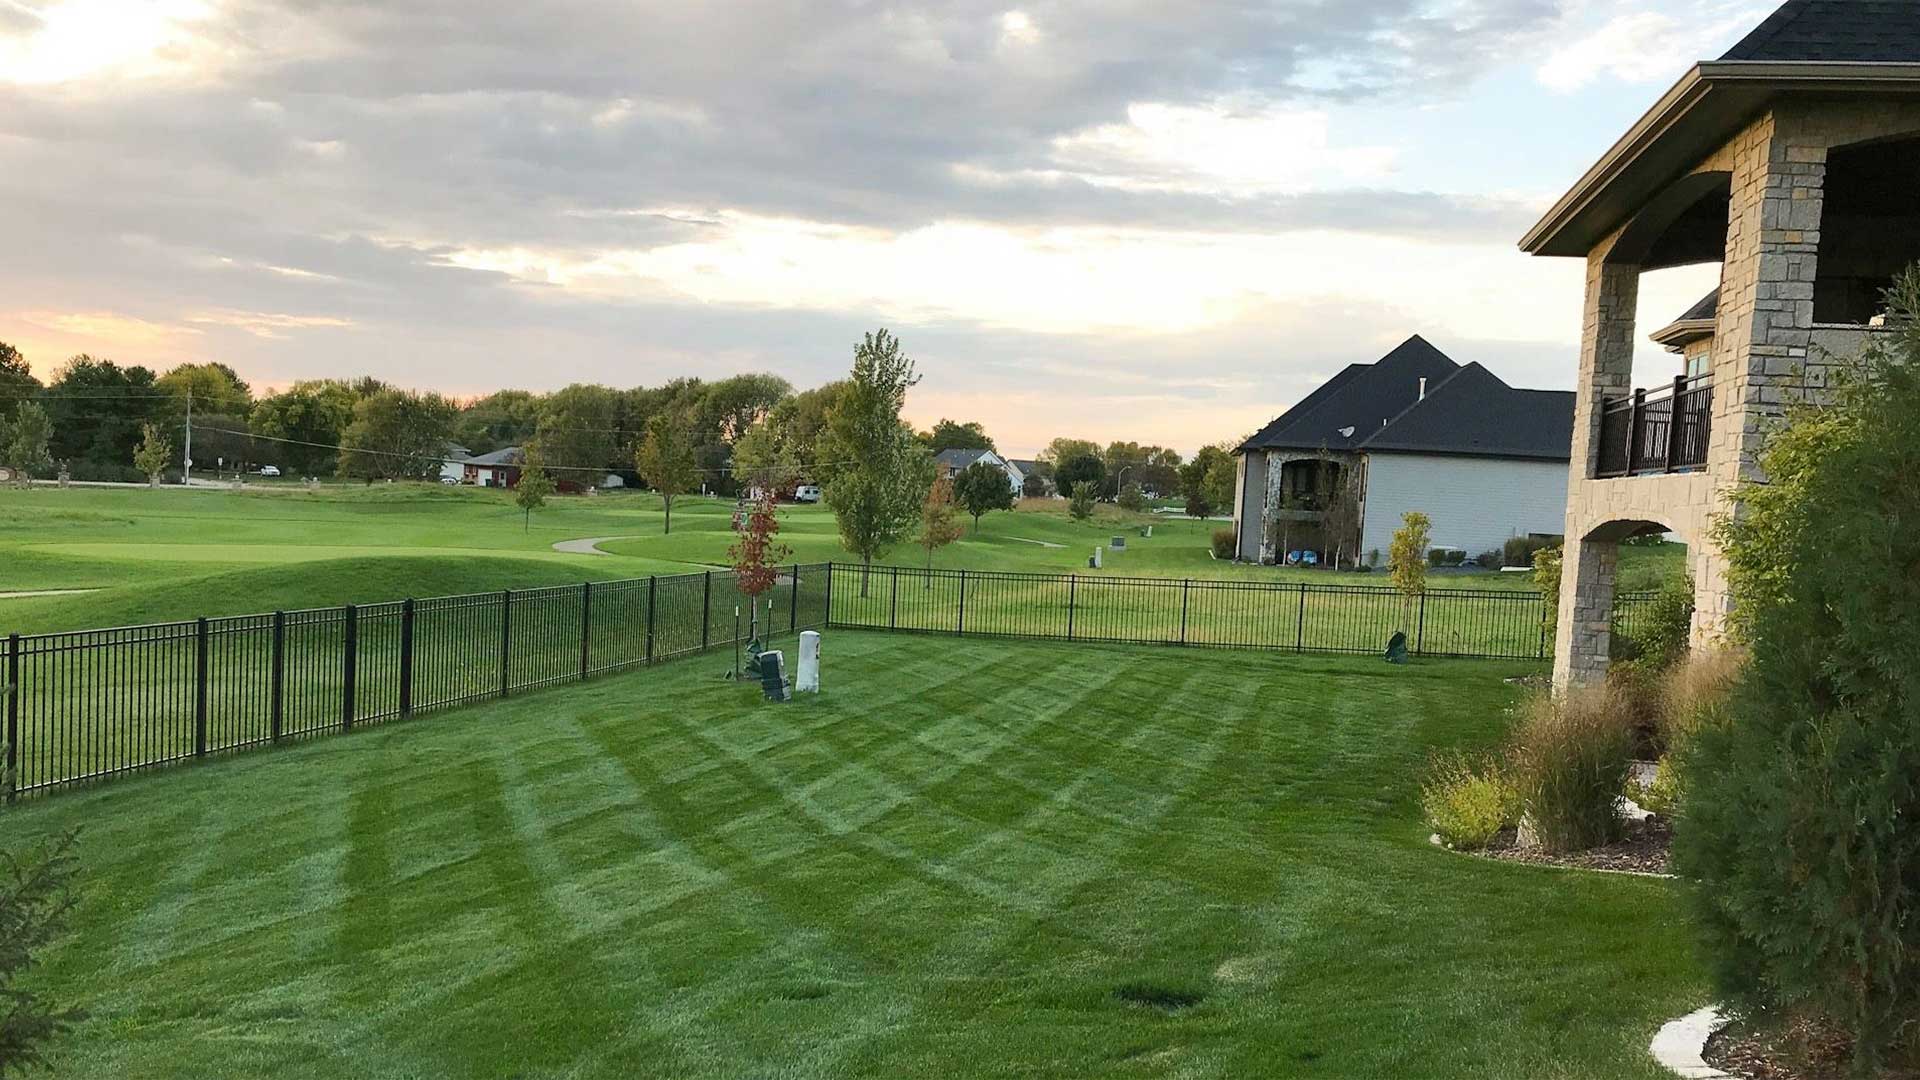 Lush, green lawn with mowing stripes in Ankeny, IA.